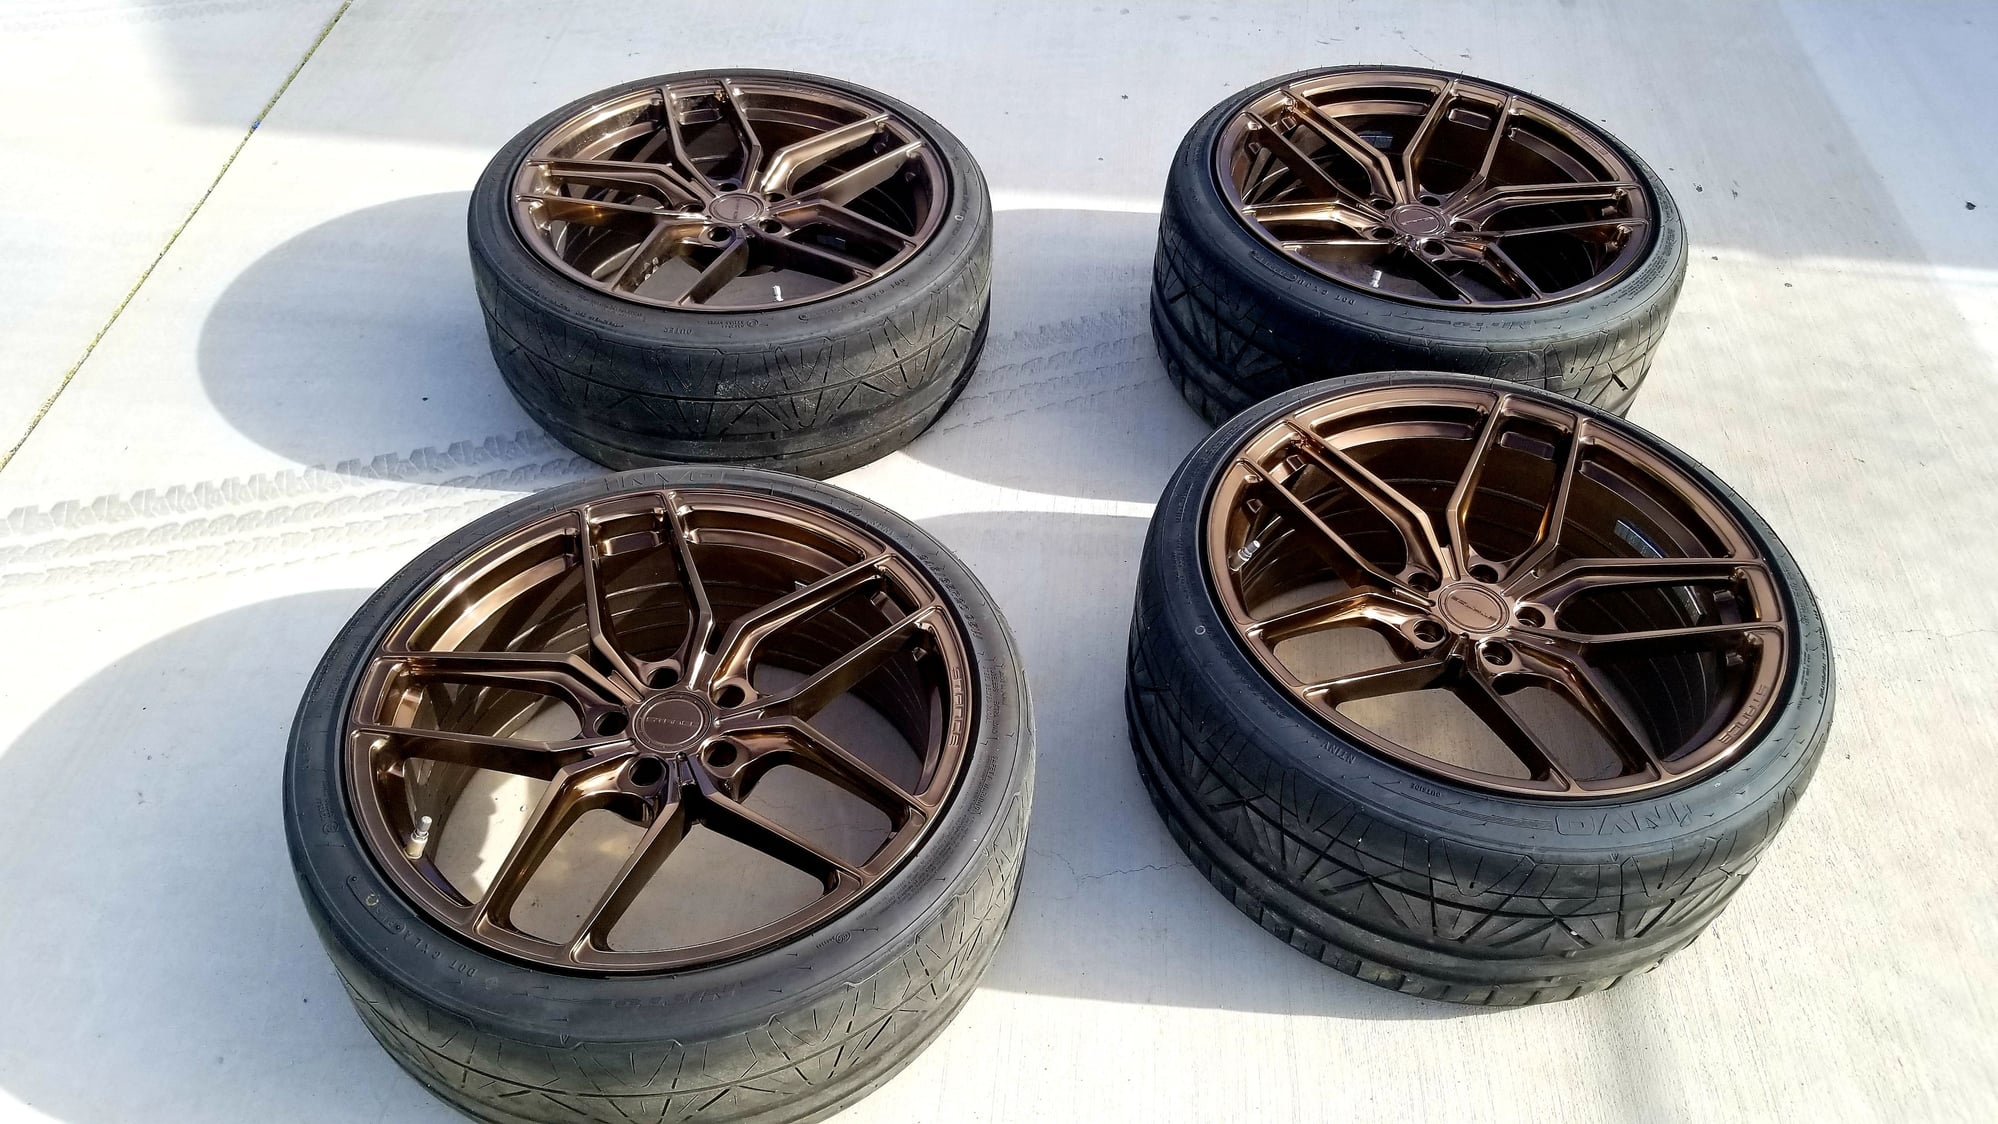 Wheels and Tires/Axles - FS: "TAILOR MADE" STANCE WHEELS SF03 5x114.3/20x9/20x10.5 with new tires - Used - All Years Acura TLX - 29 Palms, CA 92277, United States